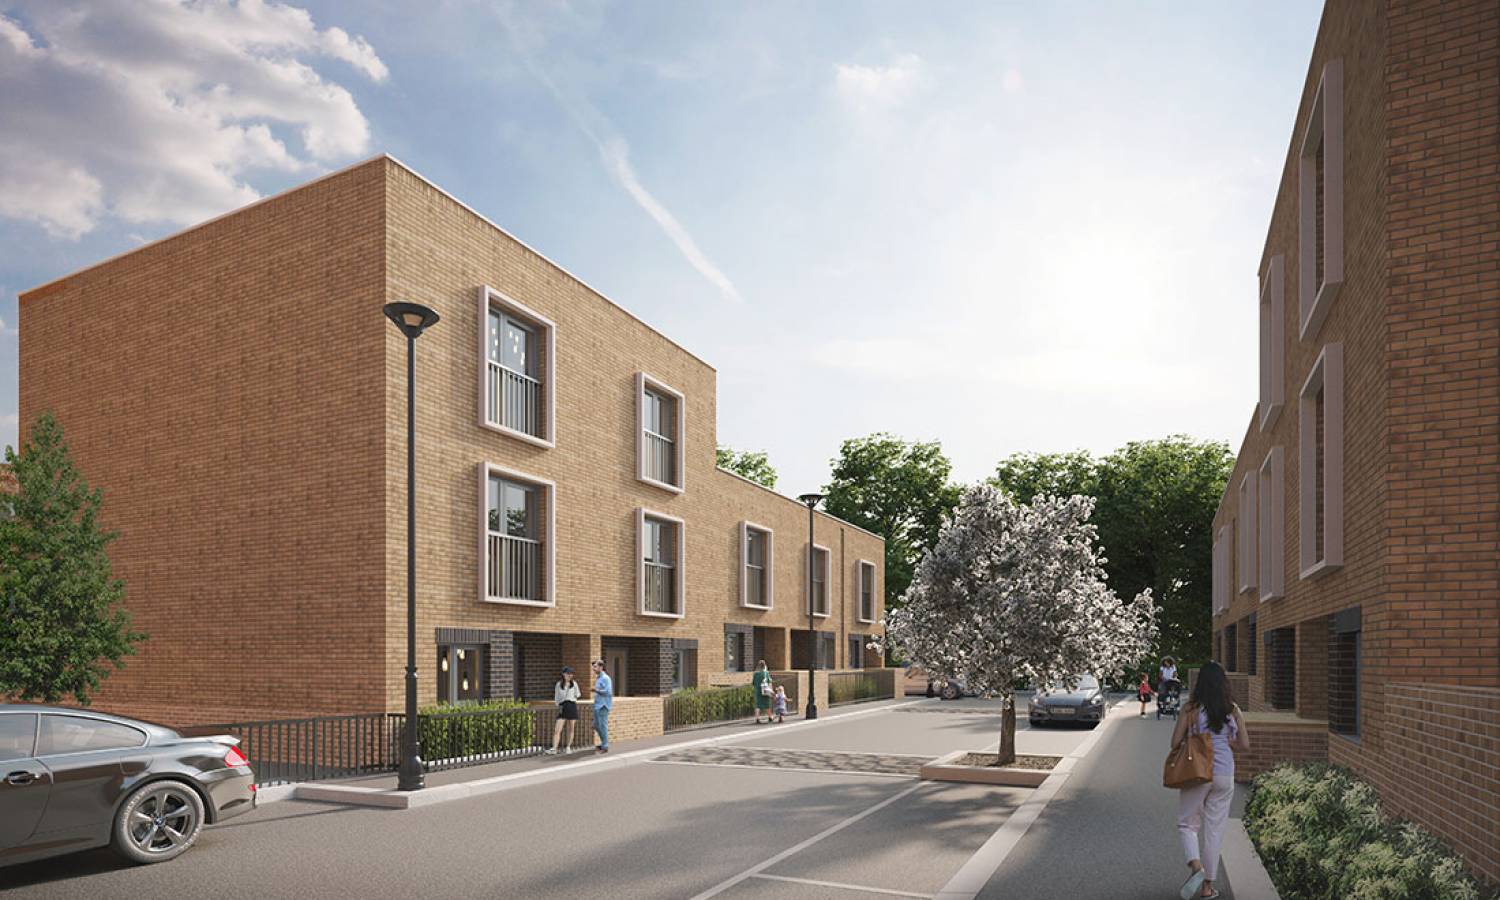 New Homes In Tooting Bec Launched By Barratt London